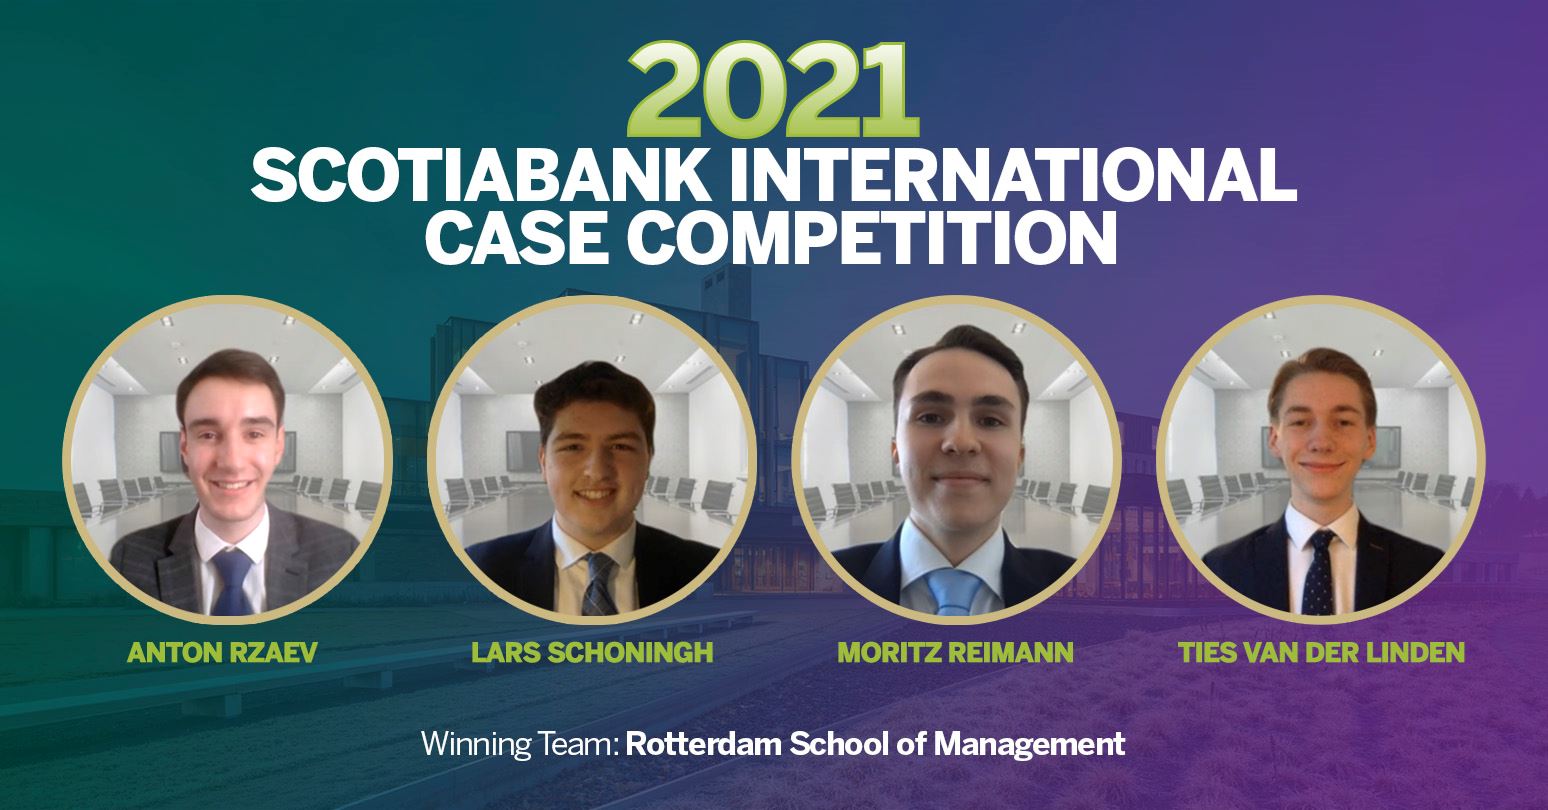 Student teams from around the world participate in Scotiabank International Case Competition